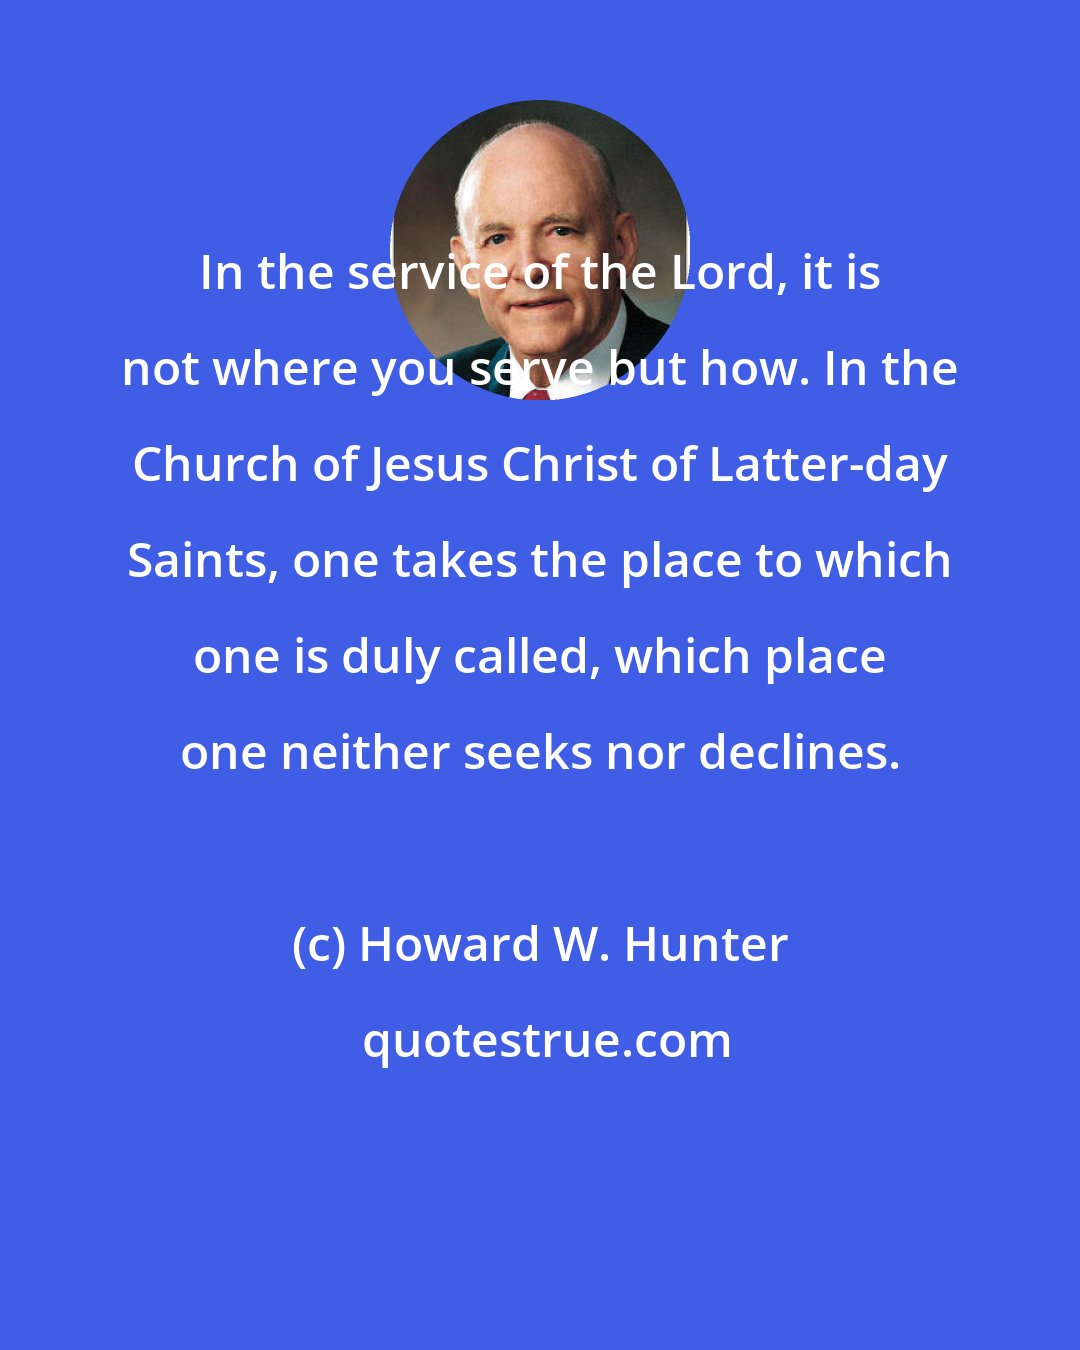 Howard W. Hunter: In the service of the Lord, it is not where you serve but how. In the Church of Jesus Christ of Latter-day Saints, one takes the place to which one is duly called, which place one neither seeks nor declines.